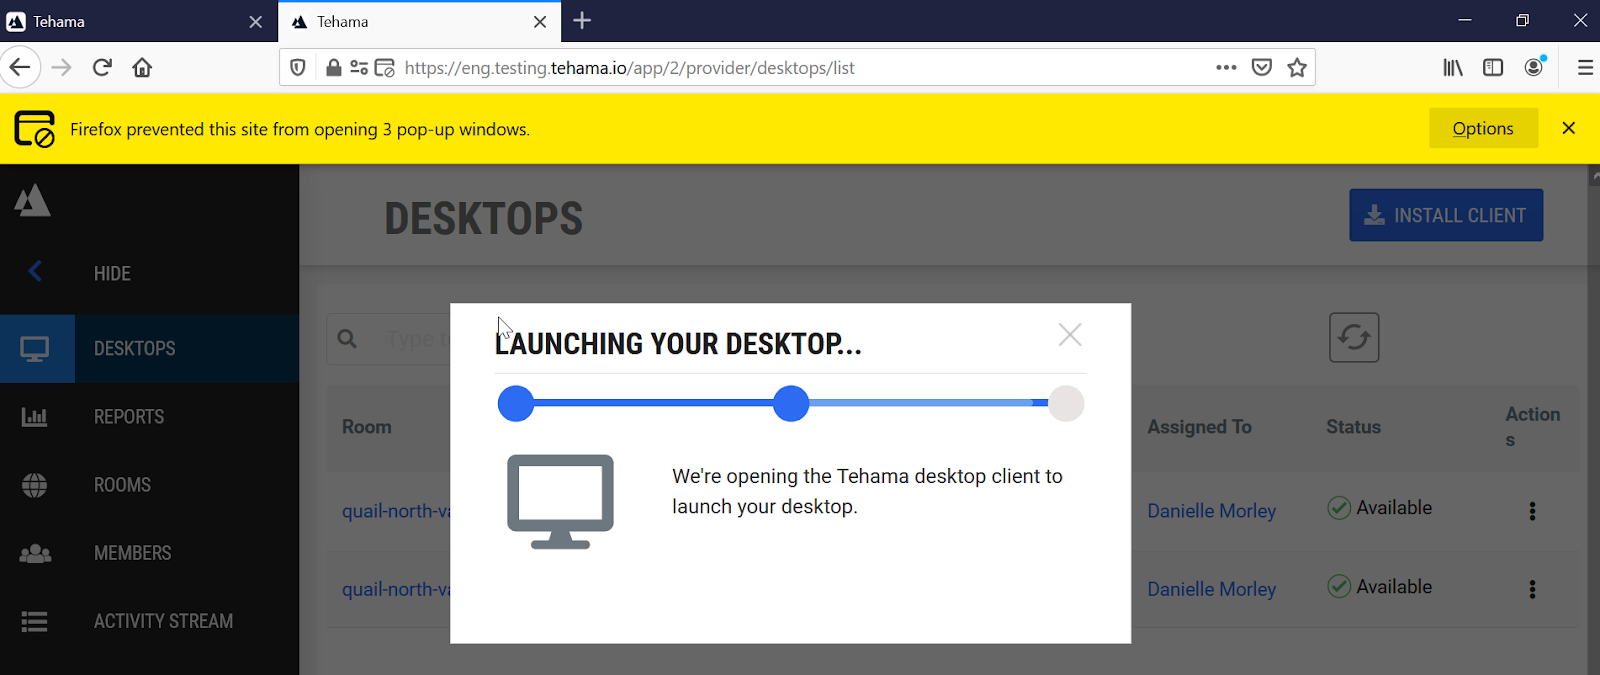 This image shows the Tehama DESKTOPS page open in a Firefox browser with a yellow banner indicating that Firefox is blocking pop-ups.